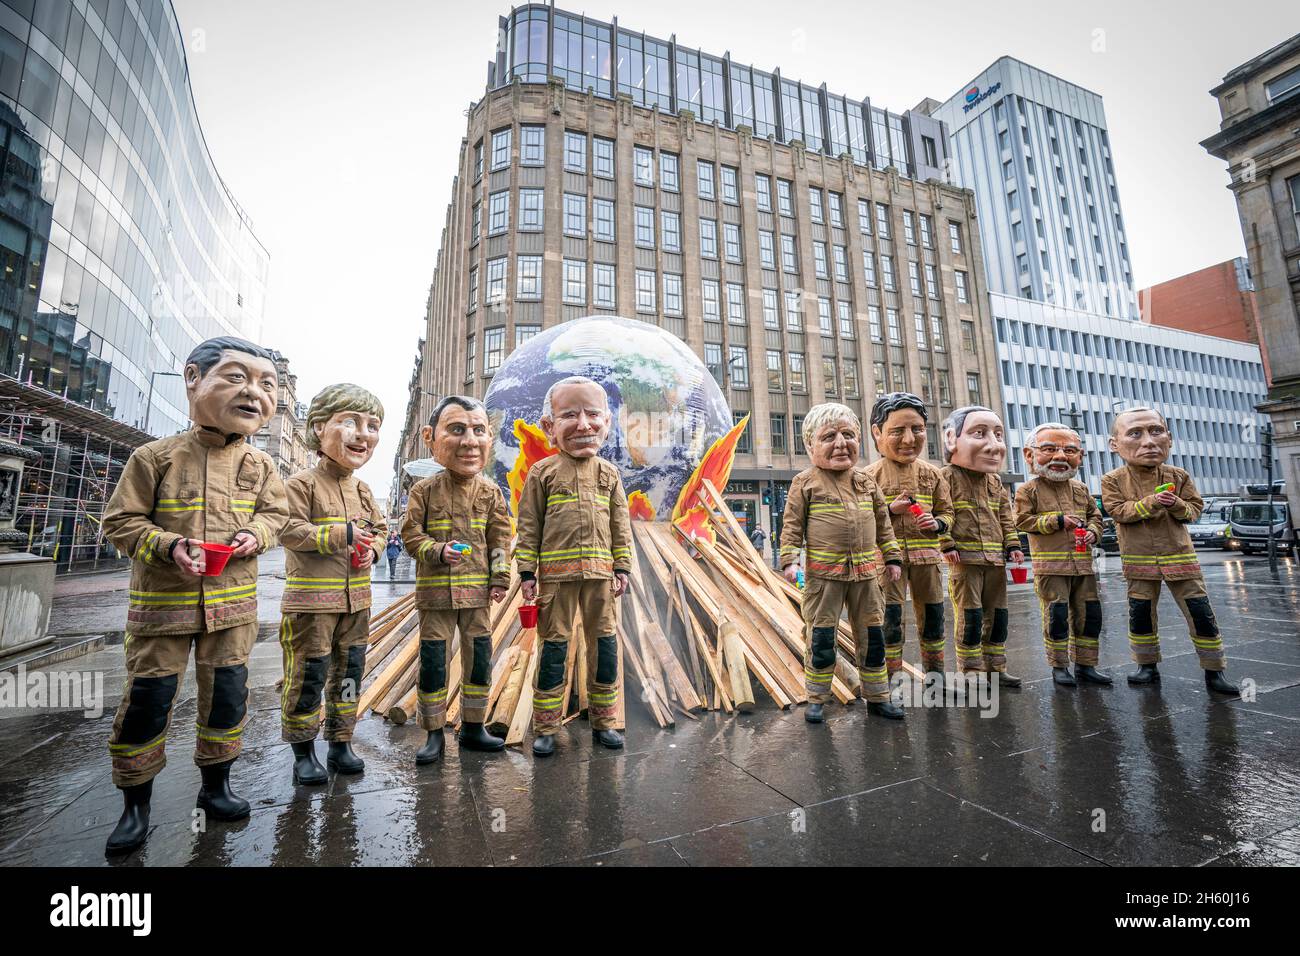 Campaigners wearing 'big heads' of world leaders, including Boris Johnson, Joe Biden, Justin Trudeau and Narendra Modi gather for Oxfam's 'Ineffective Fire-Fighting World Leaders' protest performance in front of a 10 foot globe with a simulated bonfire, during the official final day of the Cop26 summit in Glasgow. Picture date: Friday November 12, 2021. Stock Photo